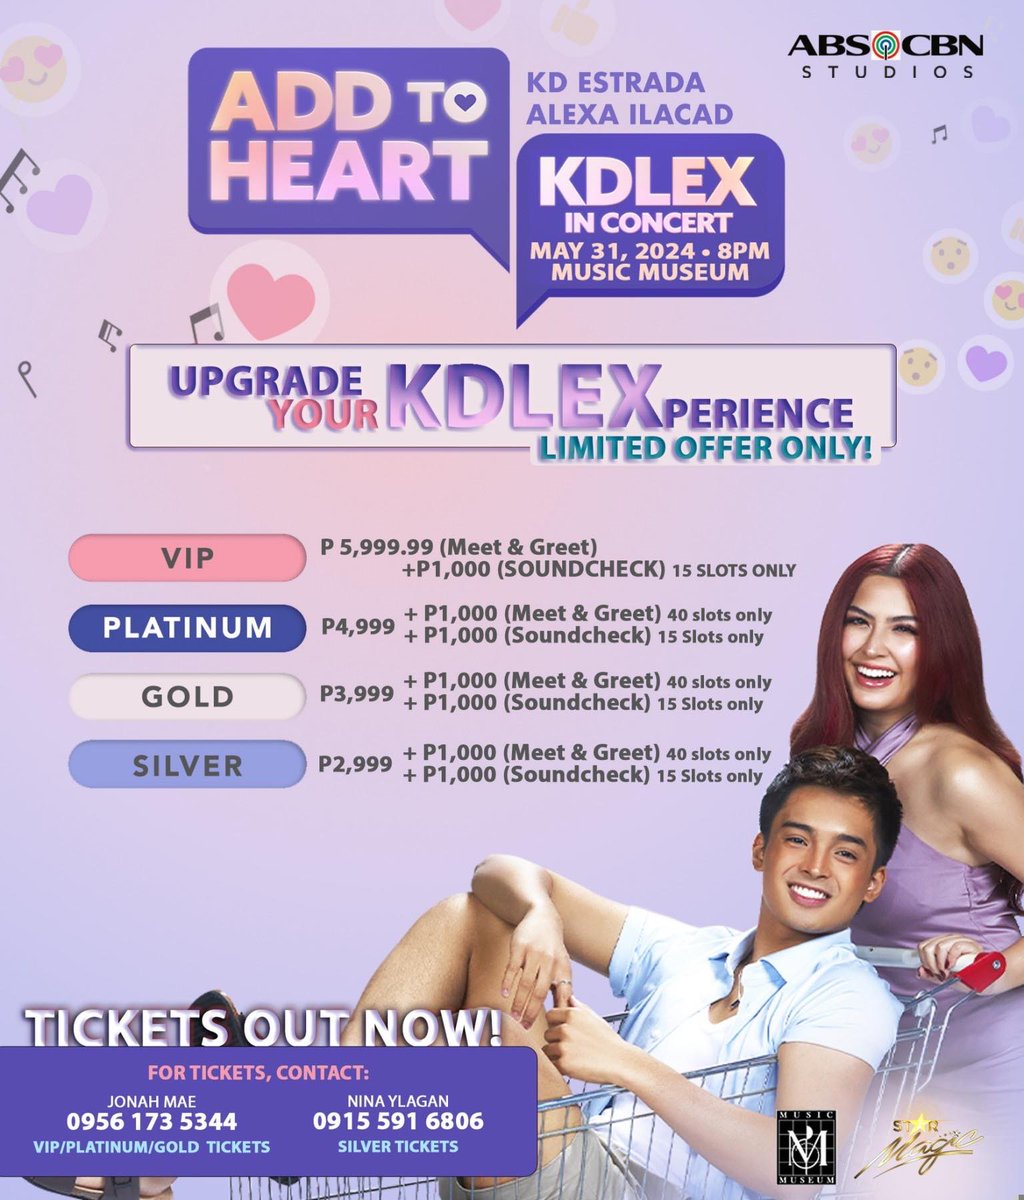 Nakapag-ADD TO HEART ka na ba? 🛒💕 Upgrade your KDLEXperience for a limited offer only! Checkout the ticket perks. 🎫 Kita-kits sa May 31, 2024, 8PM at the Music Museum. For tickets, contact: JONAH MAE 09561735344 VIP/PLATINUM TICKETS/GOLD NINA YLGAN 09155916806 SILVER…